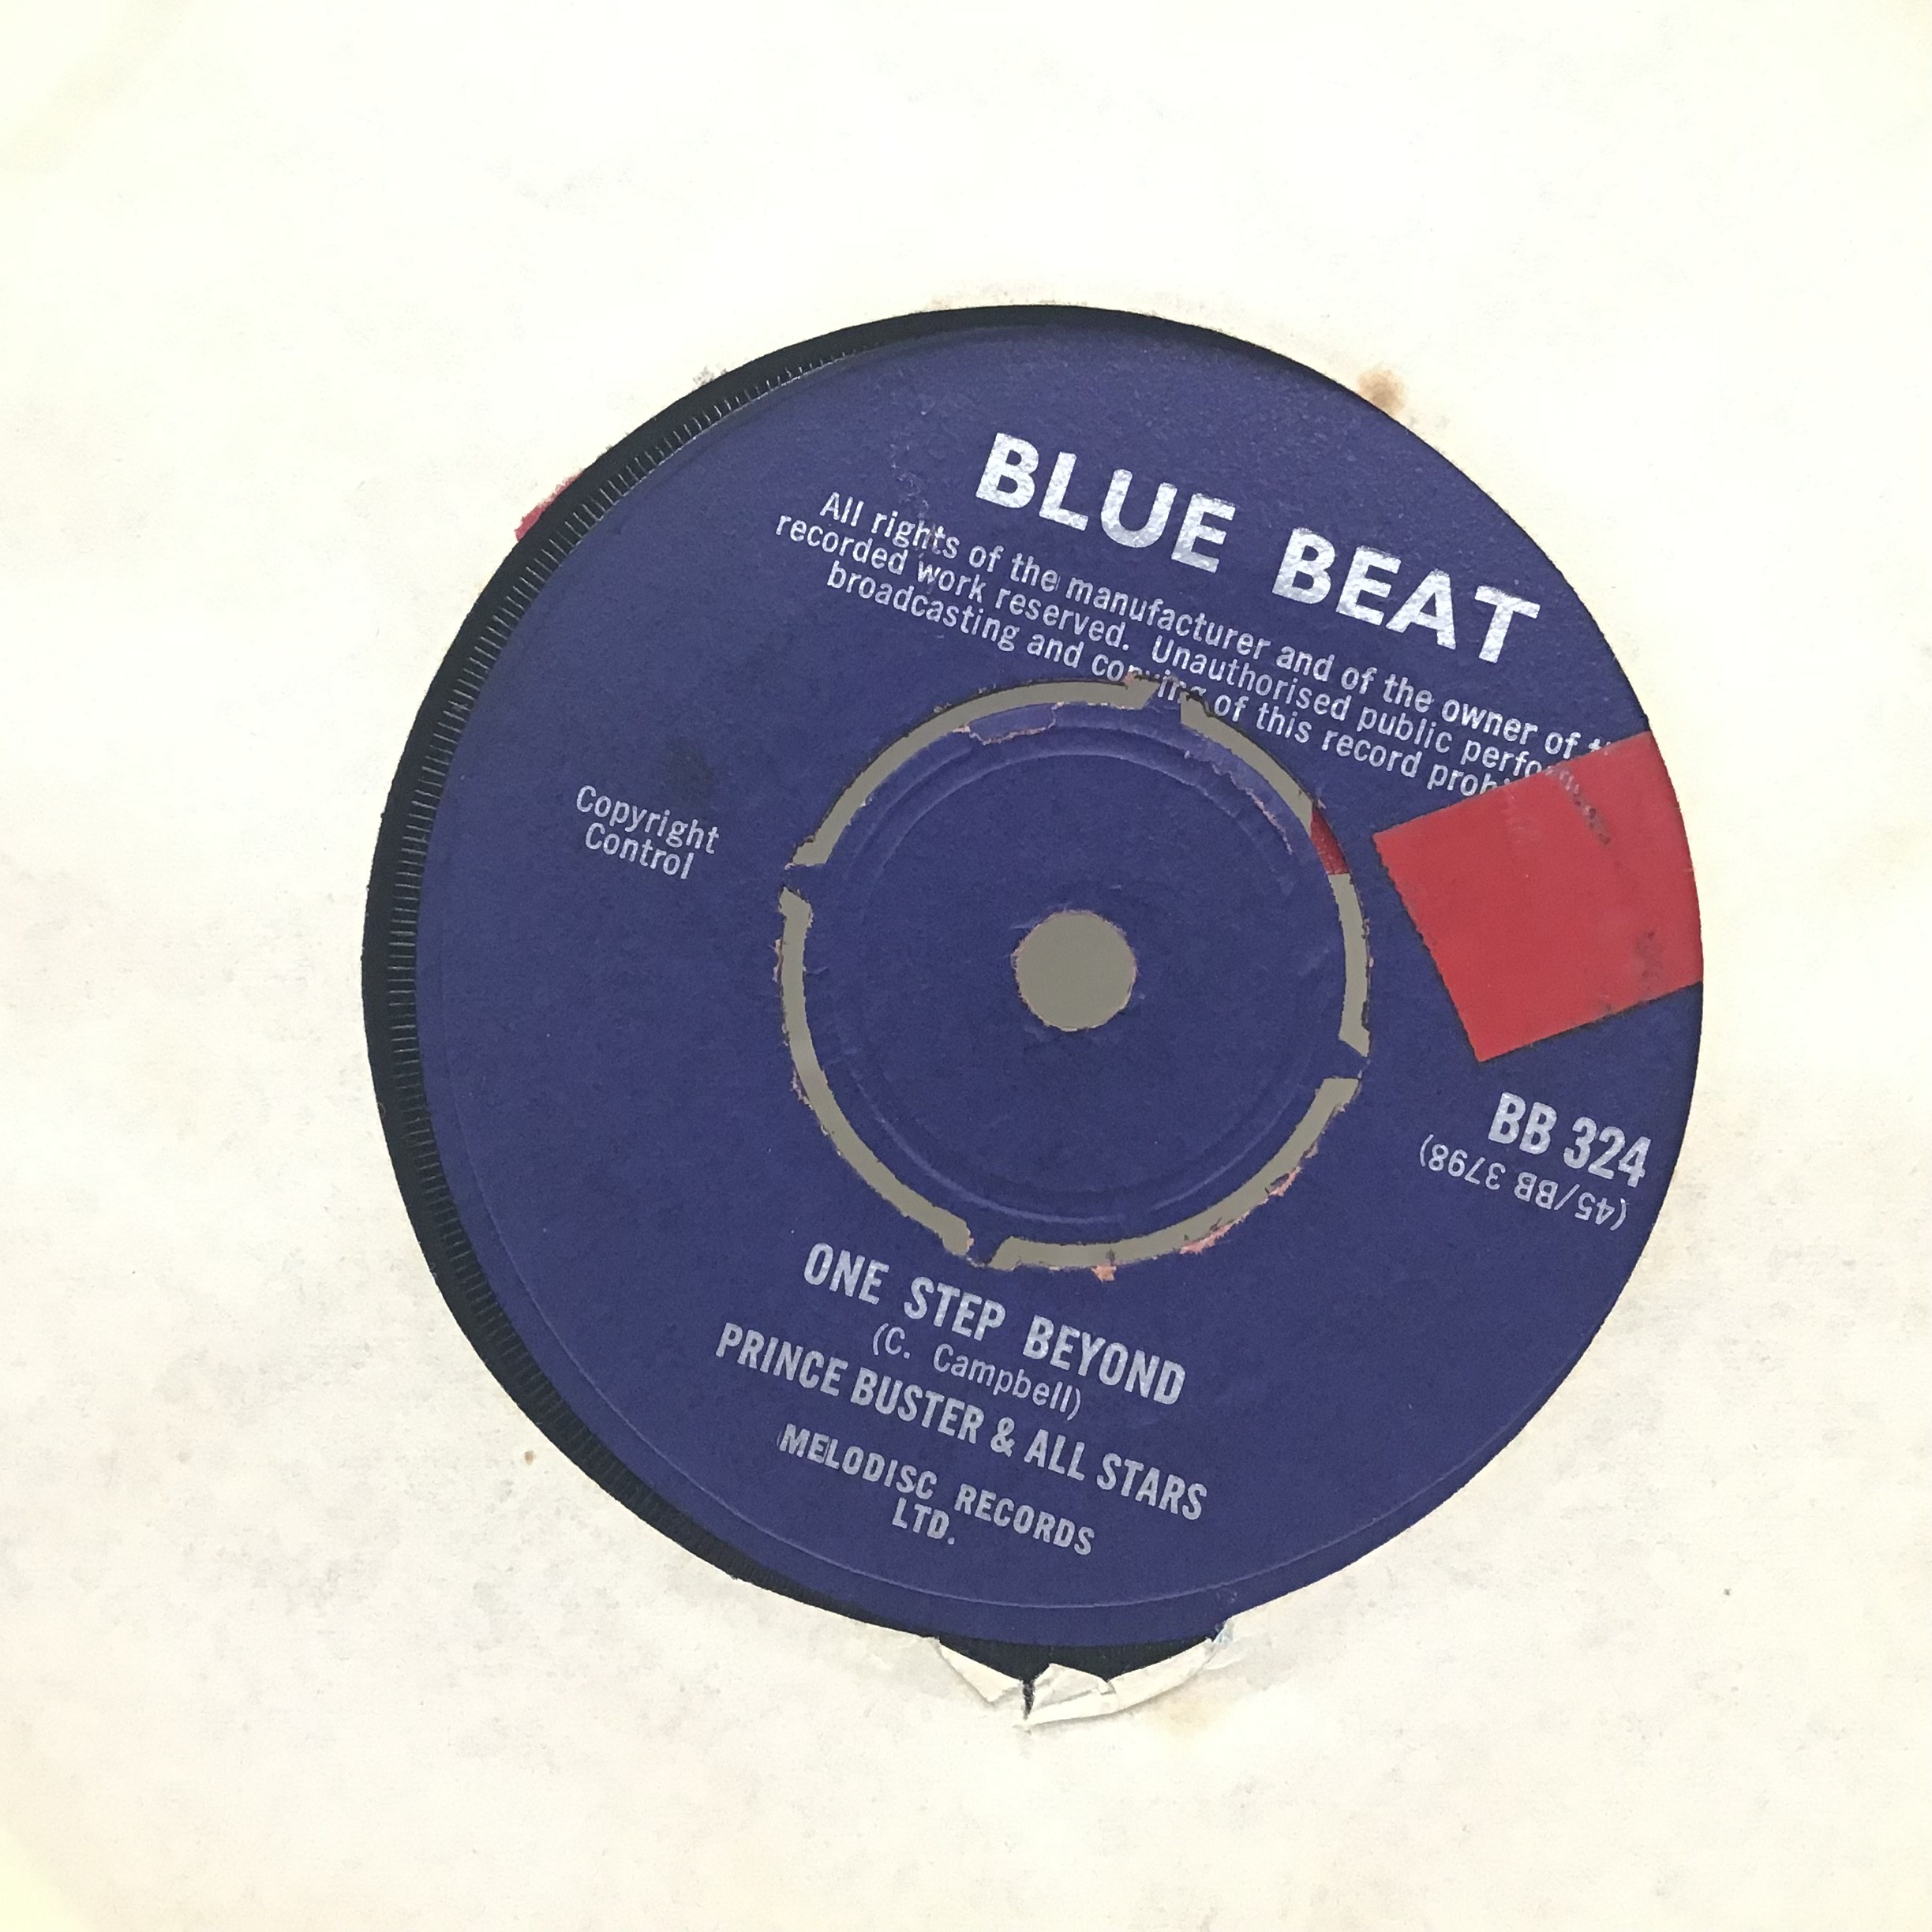 PRINCE BUSTER 7" 'AL CAPONE b/w ONE STEP BEYOND'. Nice Ska/Reggae 45 from 1965 on Blue Beat BB 324 - Image 2 of 2